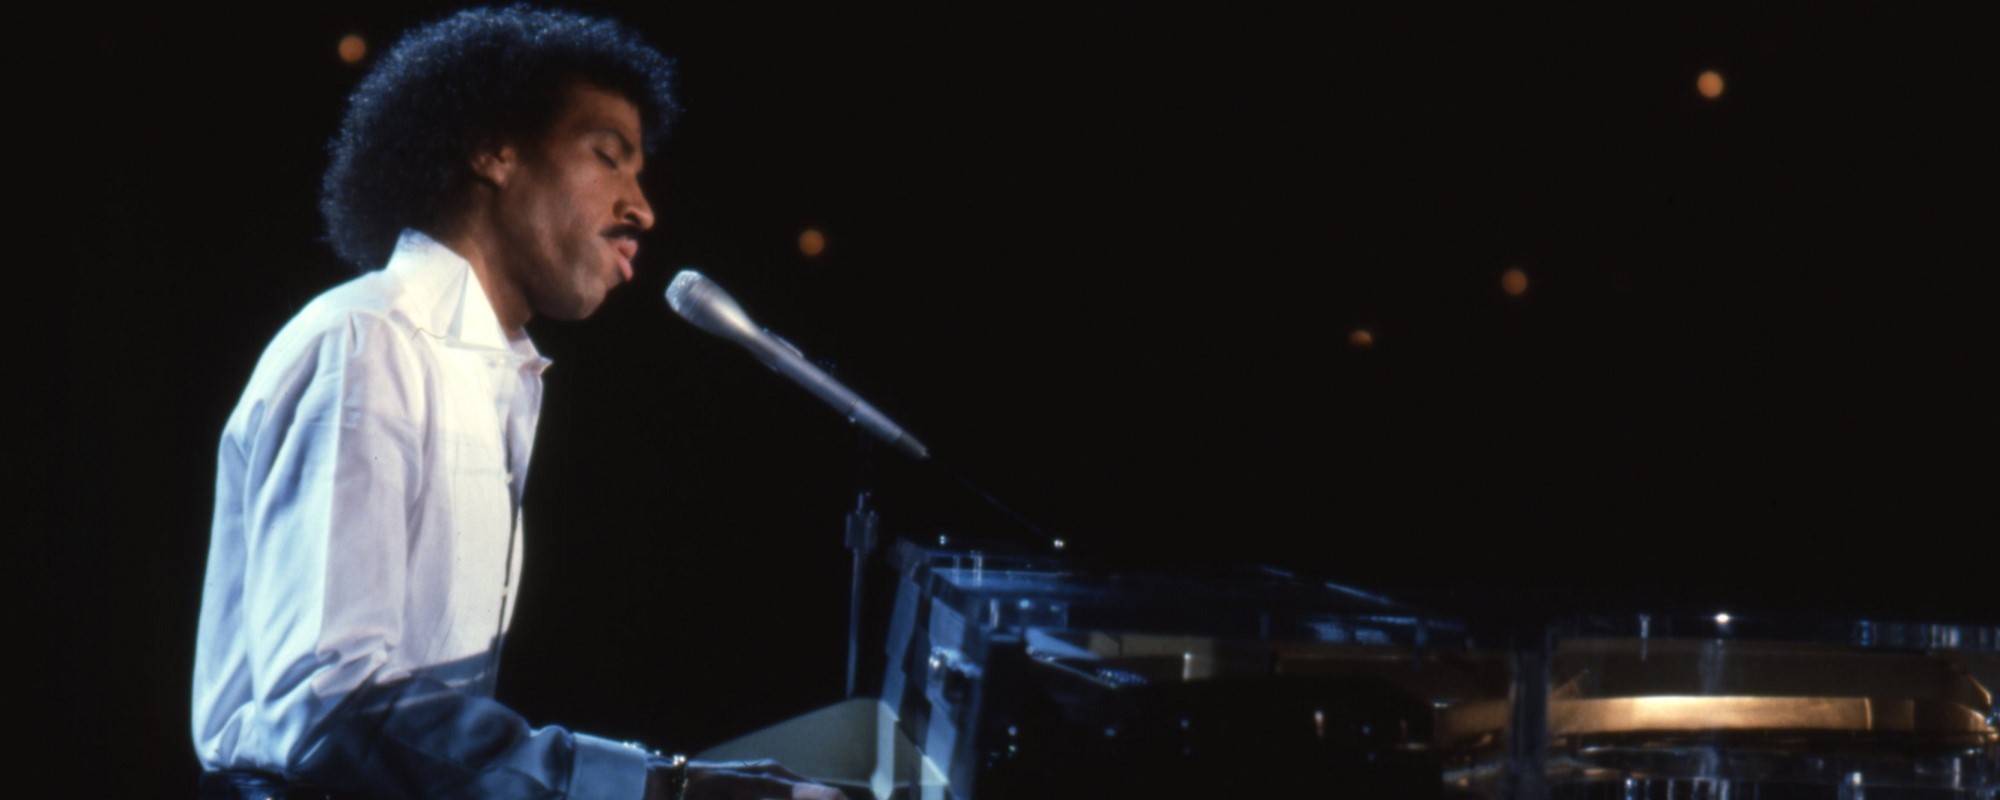 Remember When: Lionel Richie’s “Hello” Topped the ‘Billboard’ Singles Chart 40 Years Ago